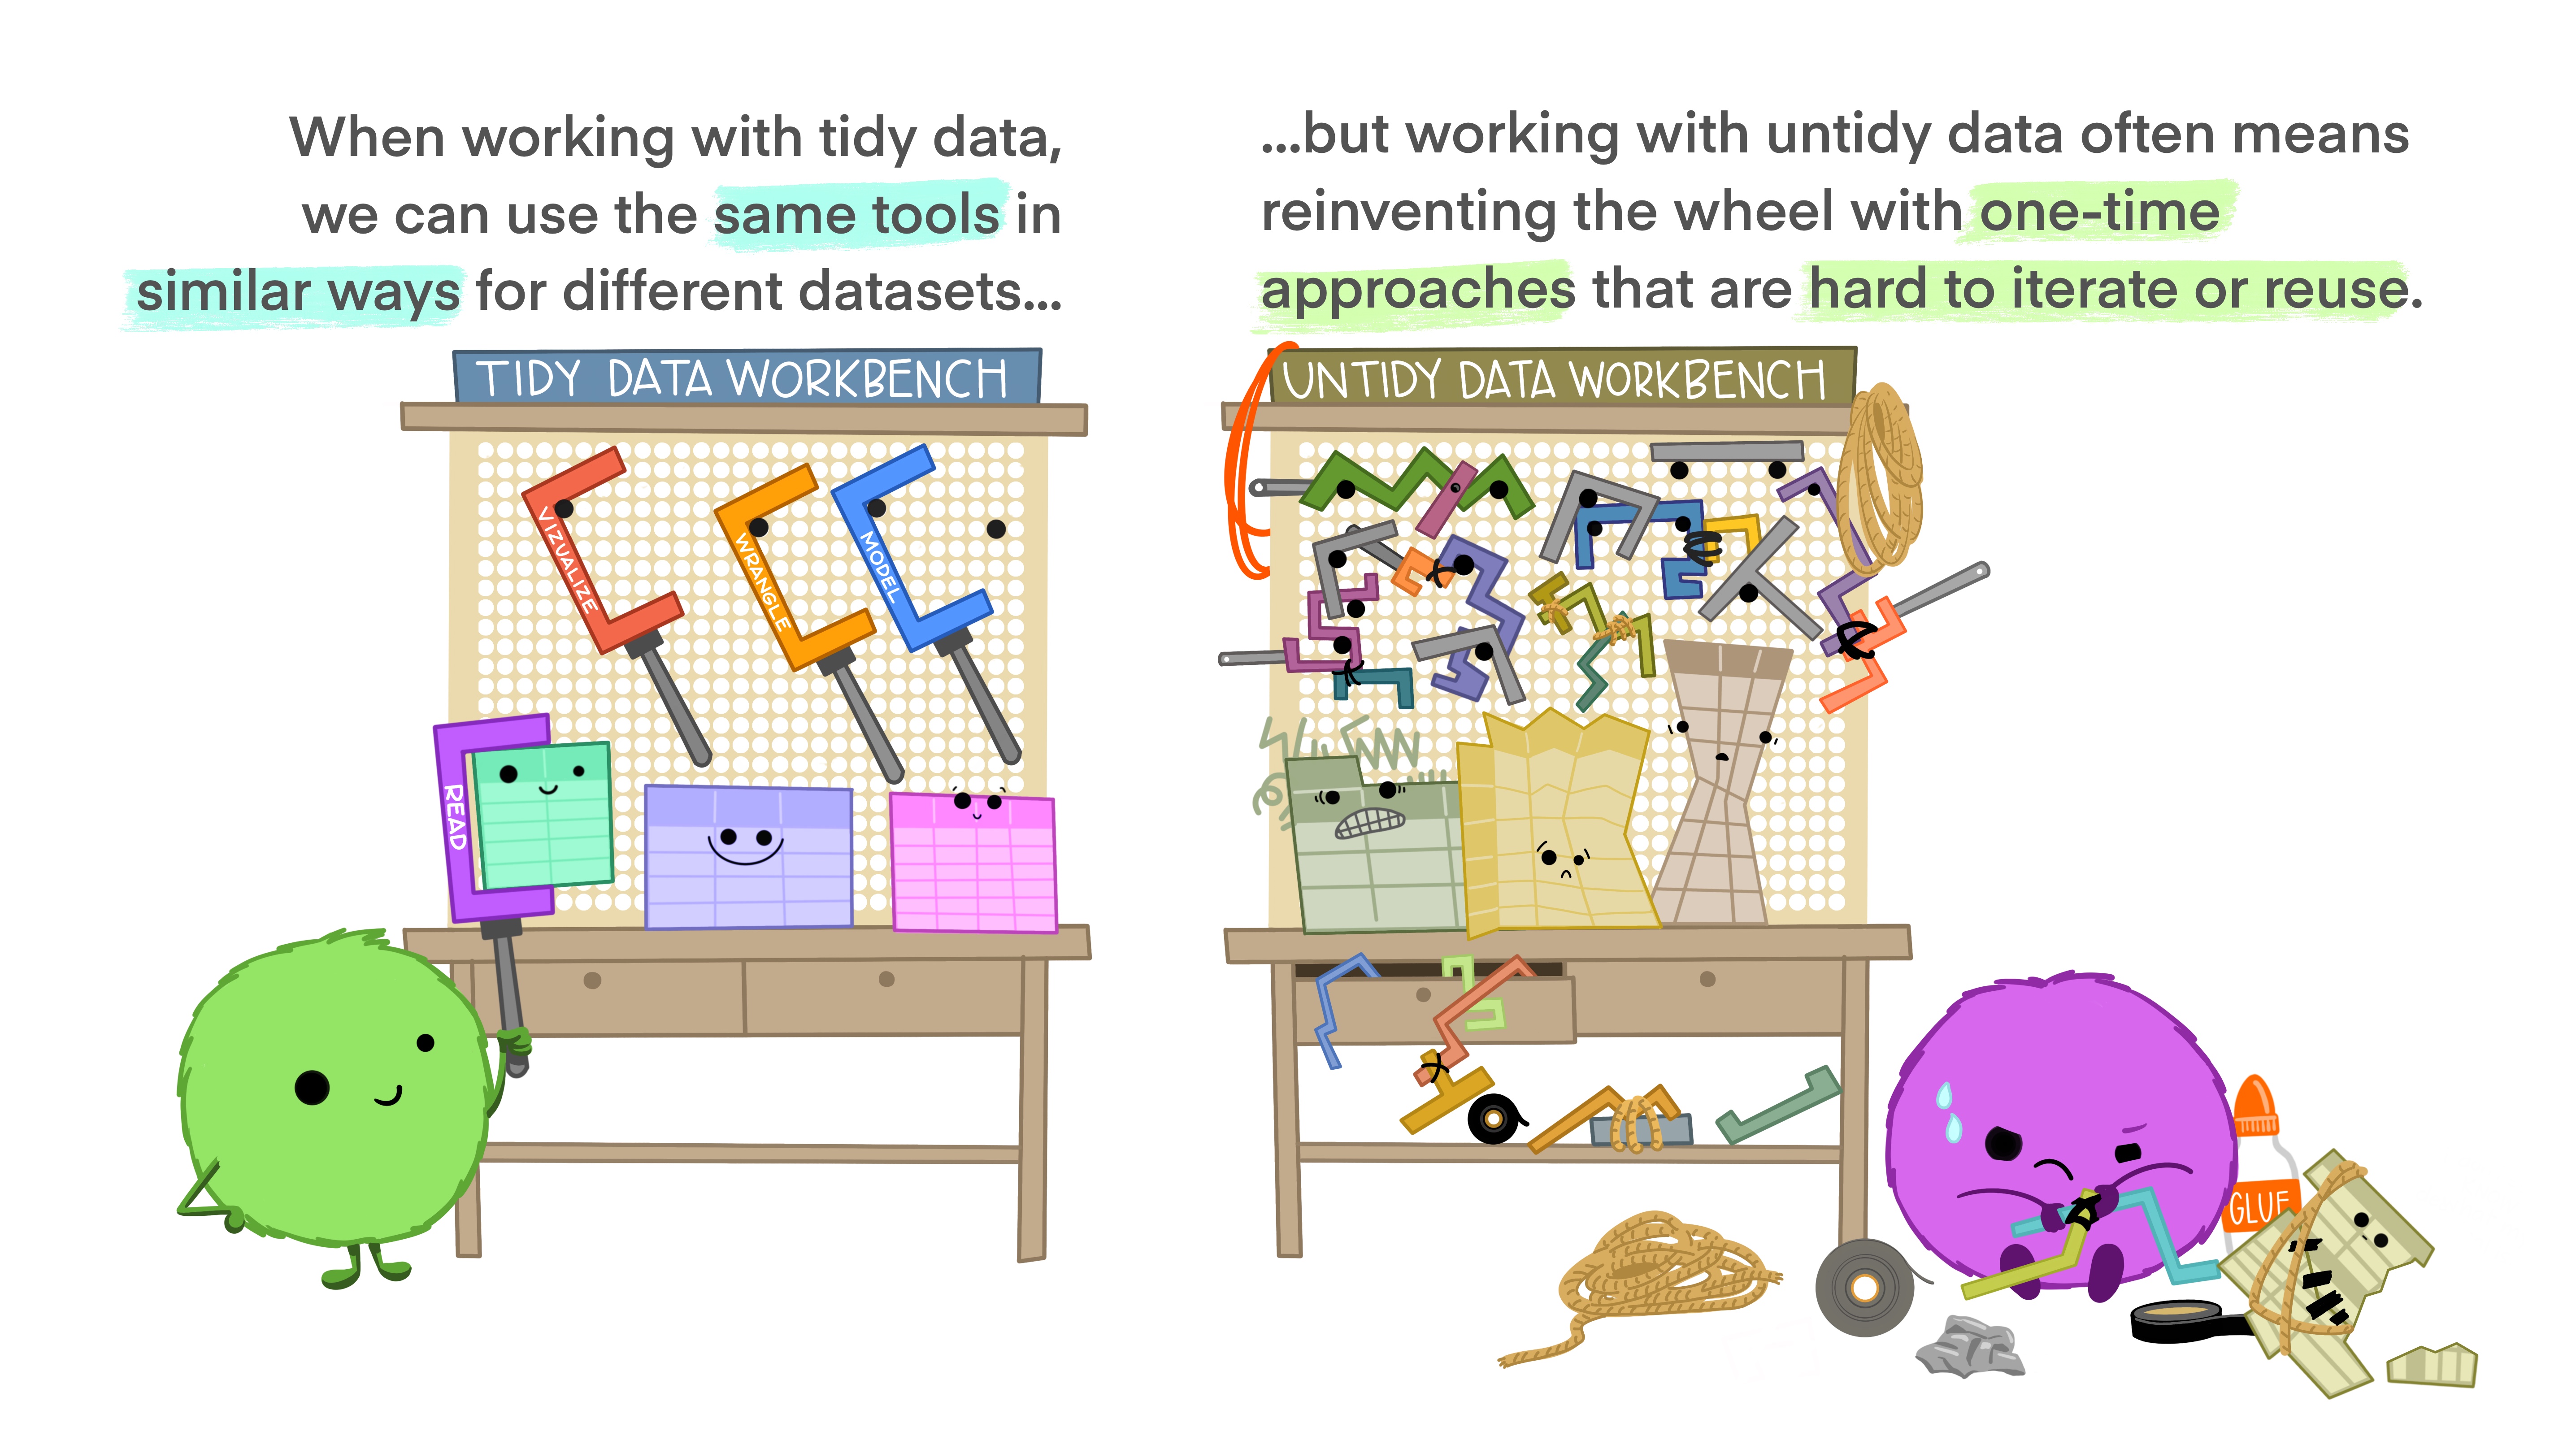 Tidy tools require tidy data